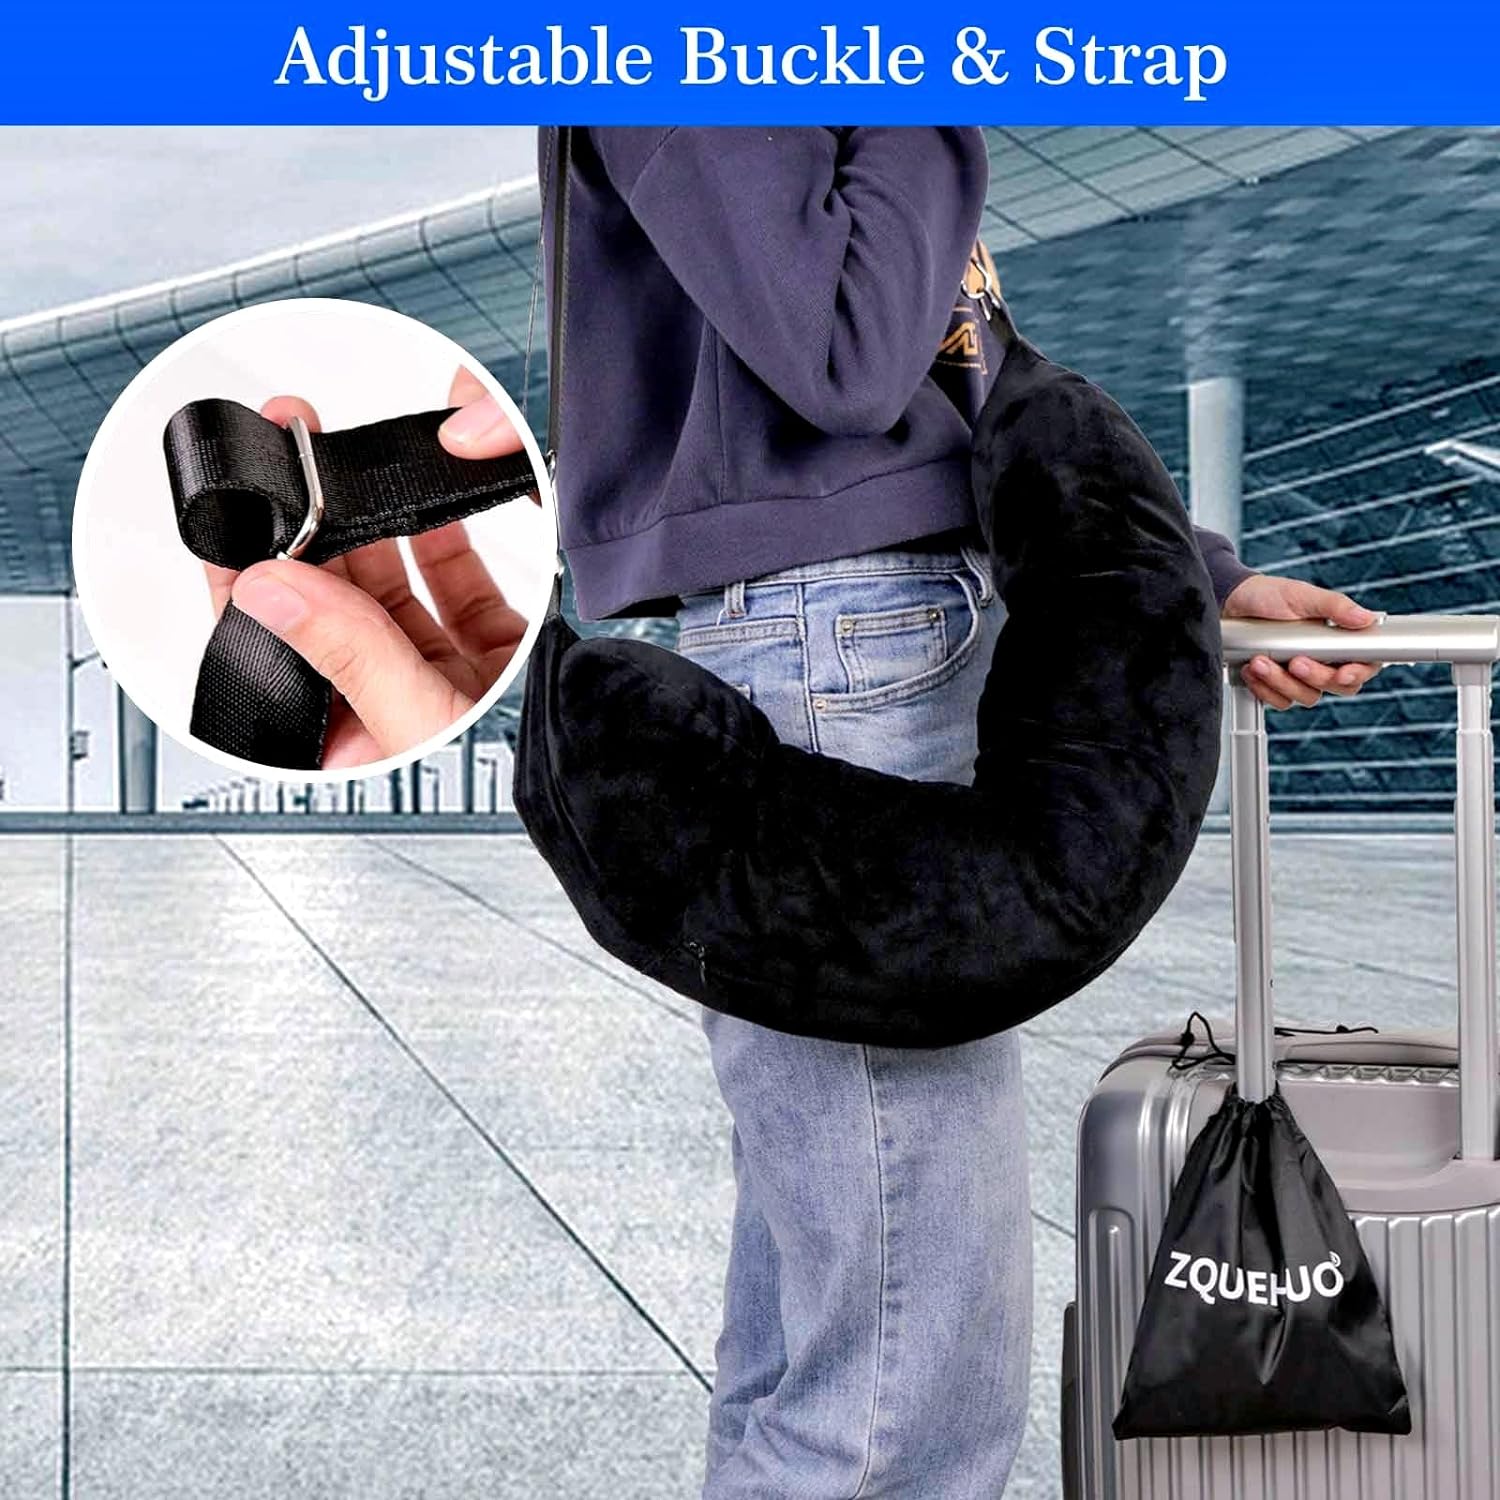 Zquehuo Travel Pillow You Stuff with Clothes, Stuffable Travel Pillow Transforms Into Extra Luggage Without Excess Fees, Stuffable Neck Pillow Fits 3+ Days of Travel Essentials Black Elastic Velvet